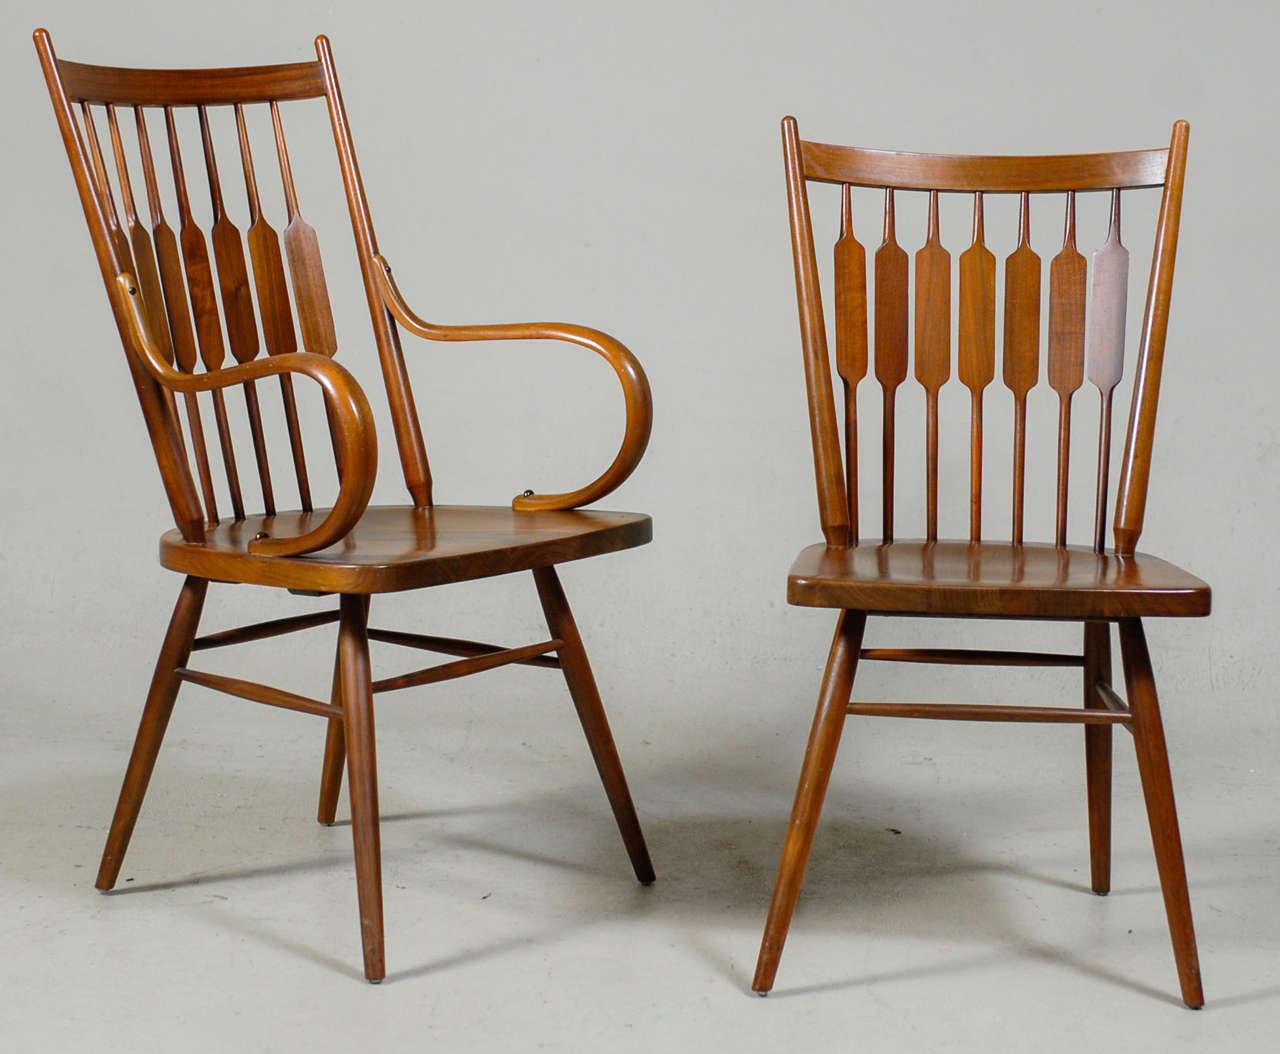 Uncommon set of eight dining chairs designed by Kipp Stewart and Stewart MacDougal for Drexel Furniture.  Set is comprised of six side and two arm chairs.   A blend of early Windsor influences with a more modern Ponti & Nakashima feel.